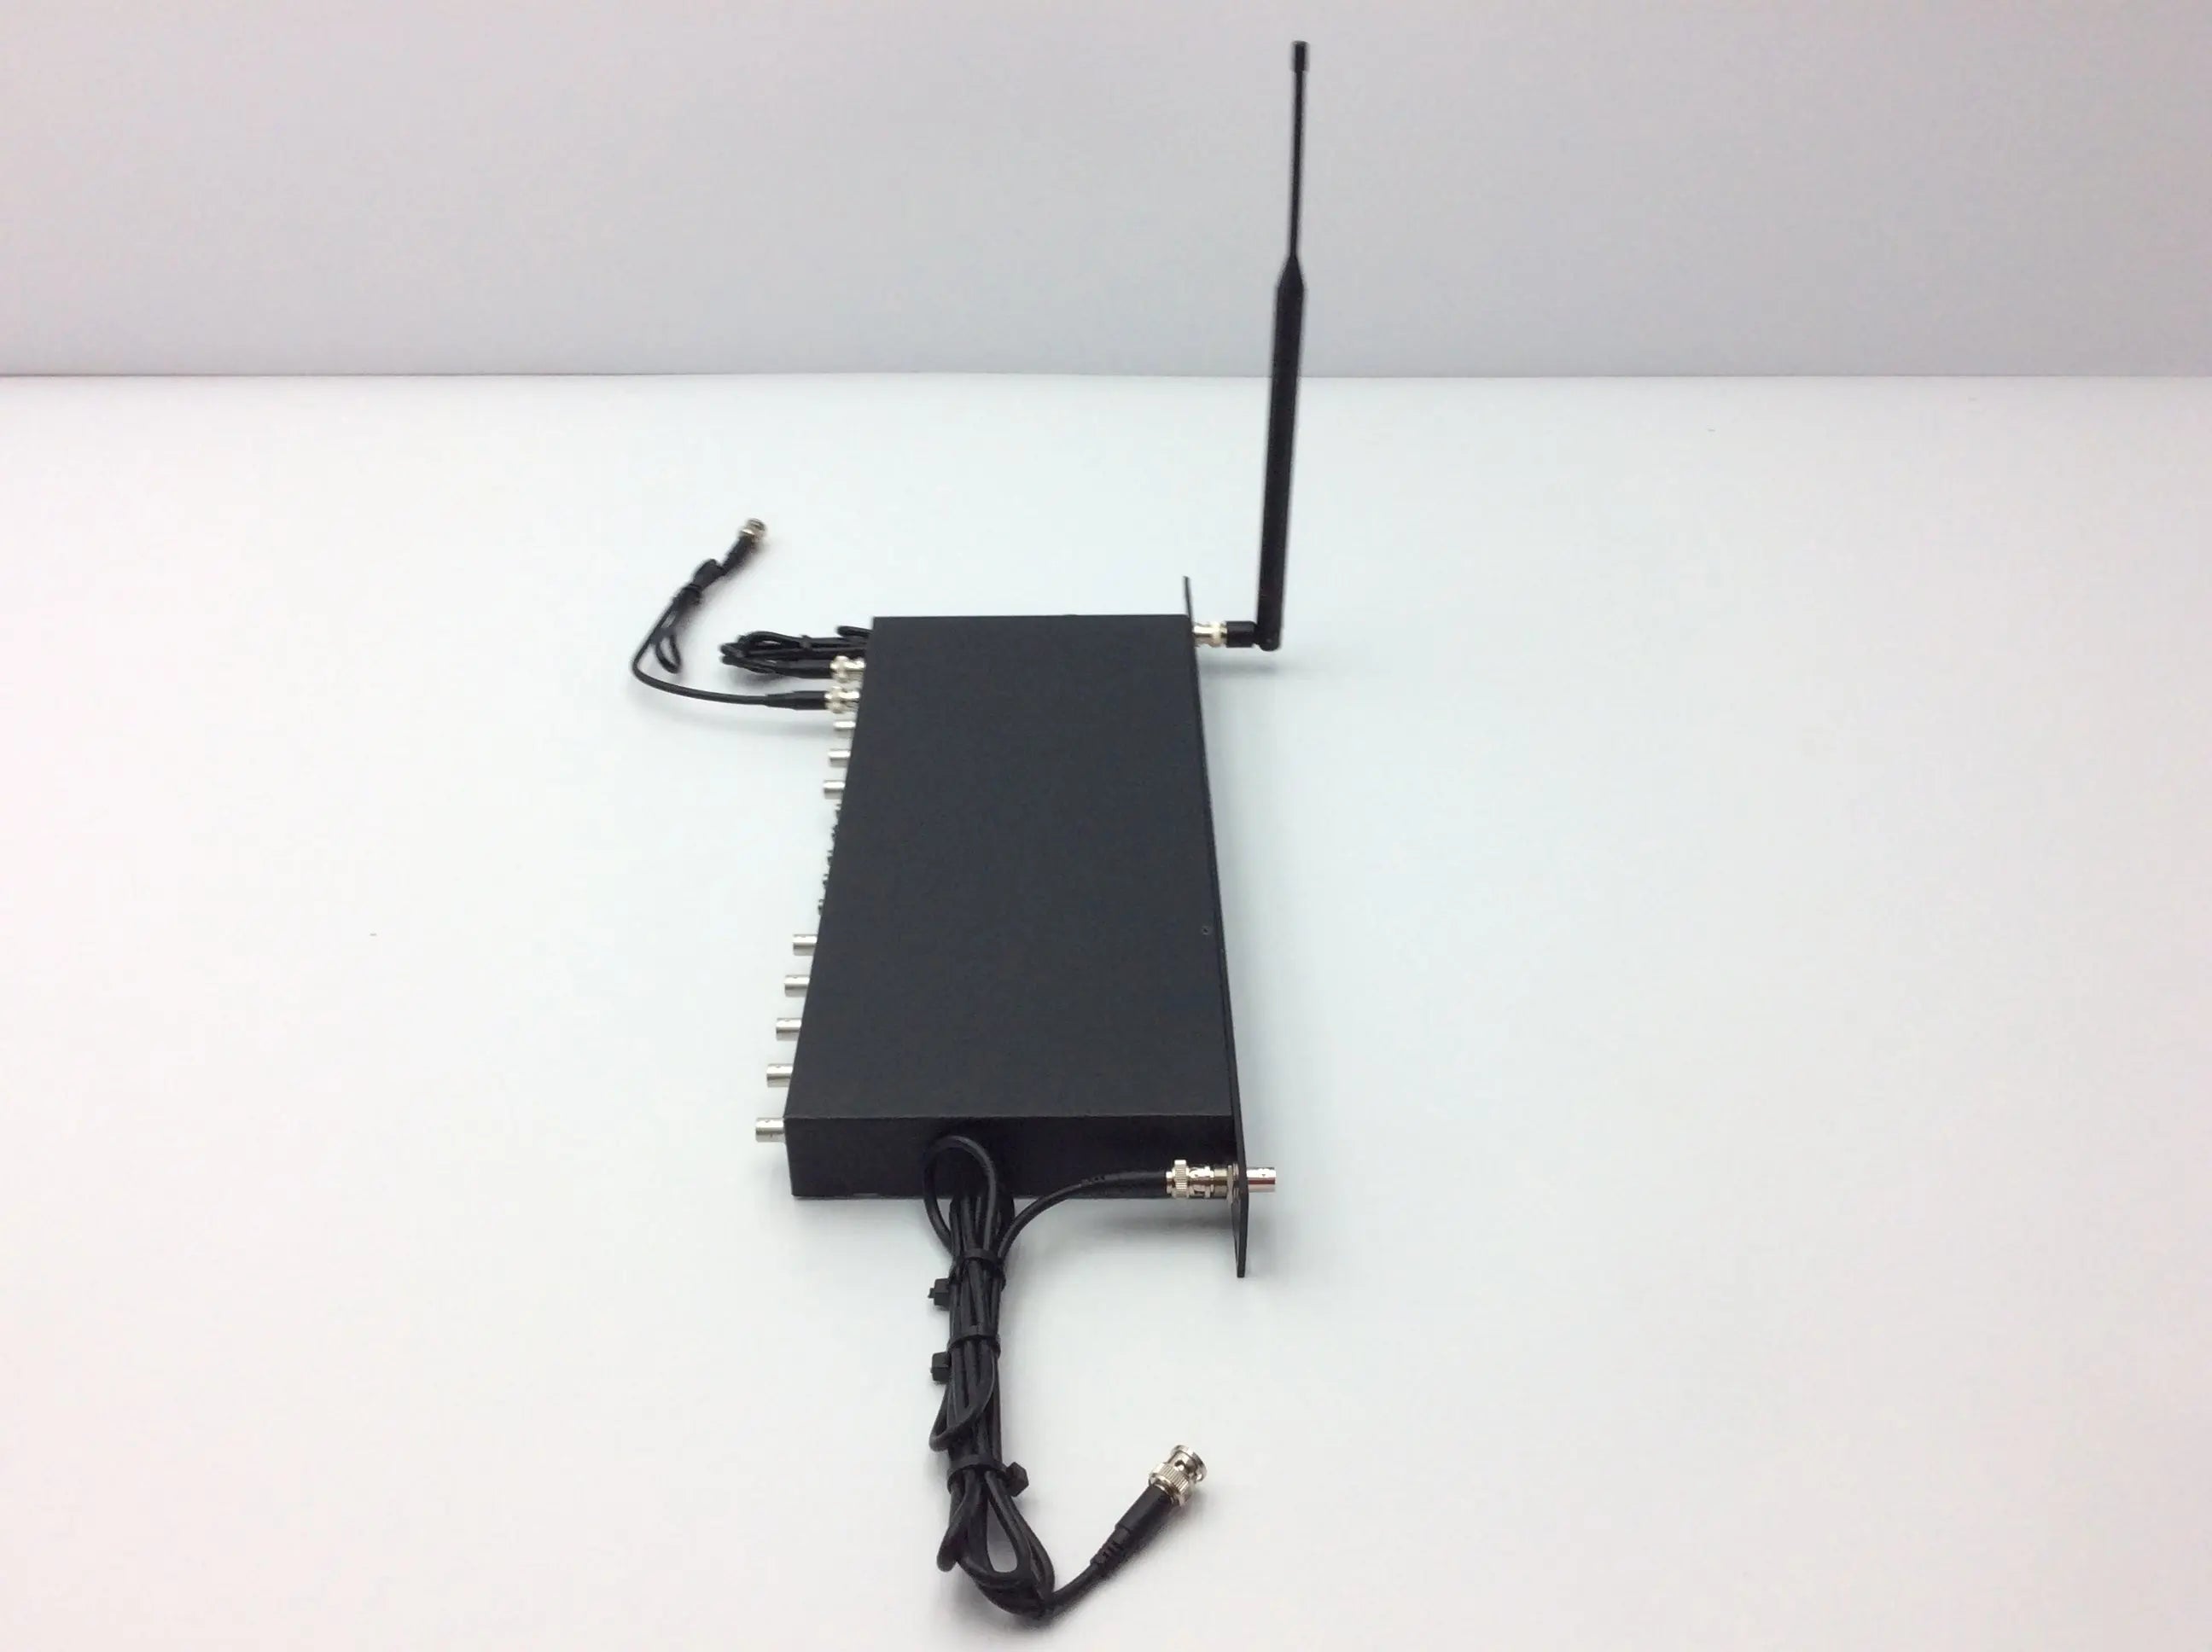 Load image into Gallery viewer, A Biomedical Service Shure UA844 UHF Antenna/Power Distribution System 700.00